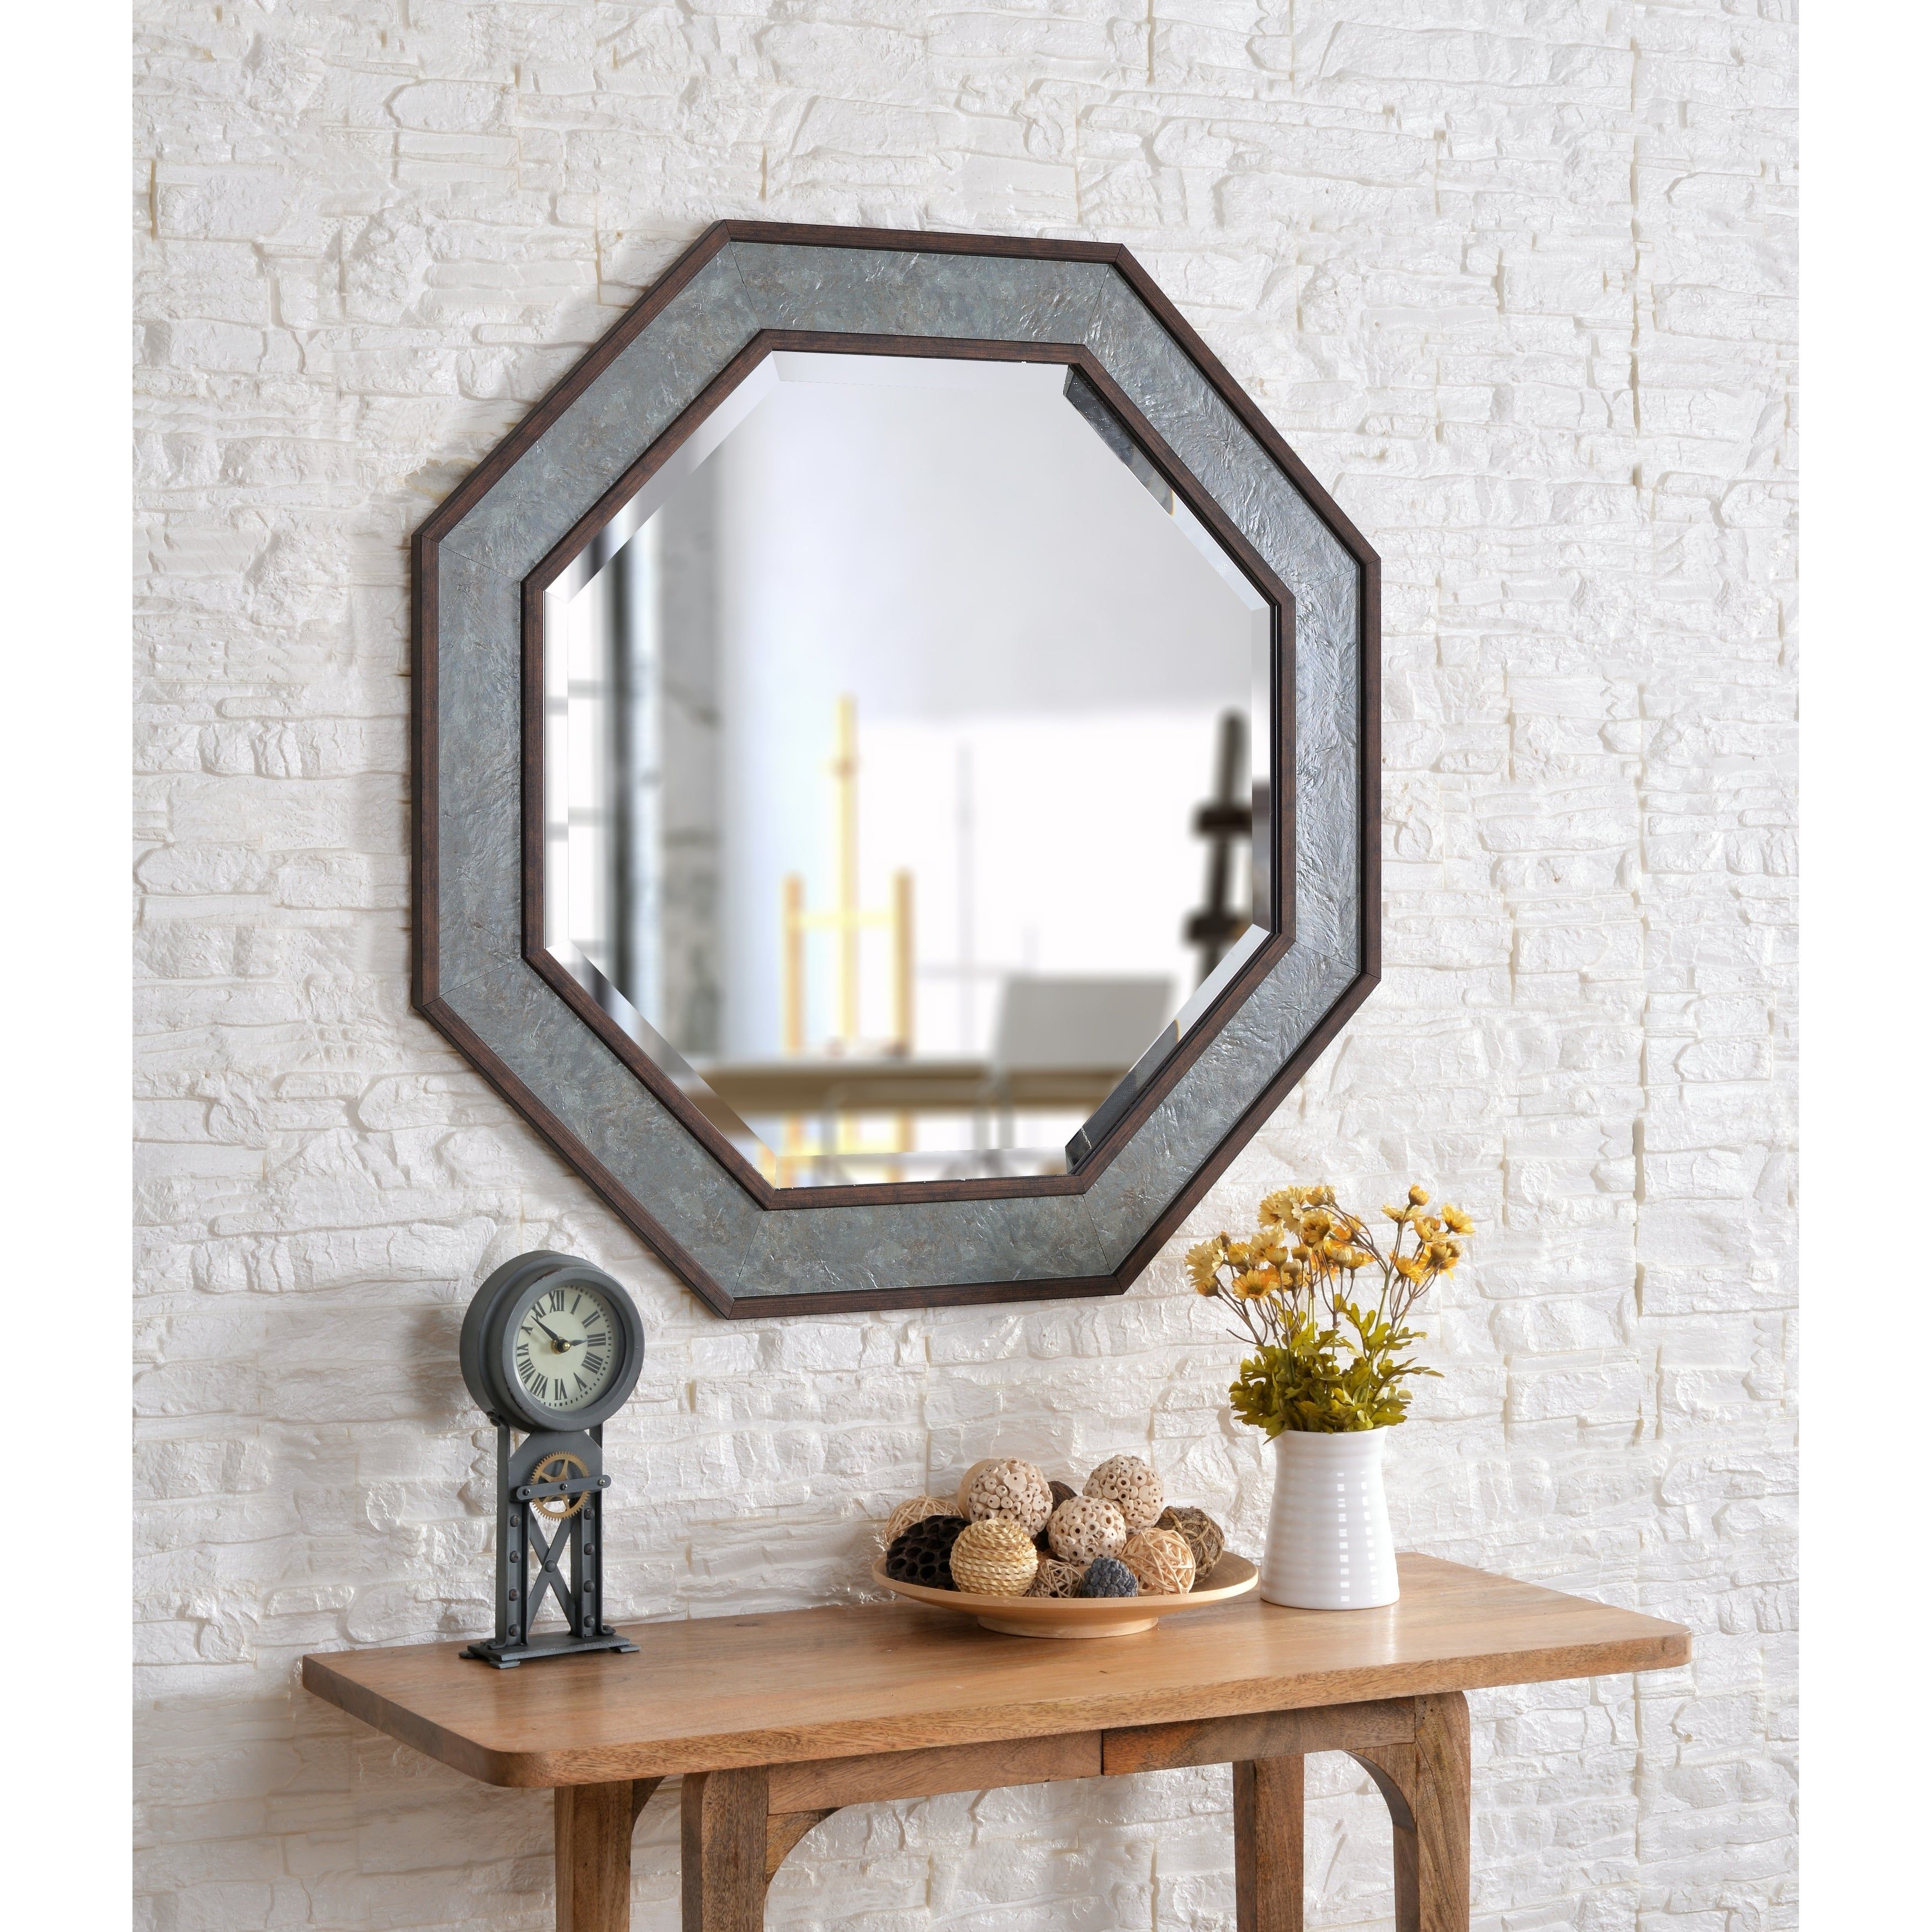 Green Mirrors | Shop Online At Overstock With Regard To Medallion Accent Mirrors (View 30 of 30)